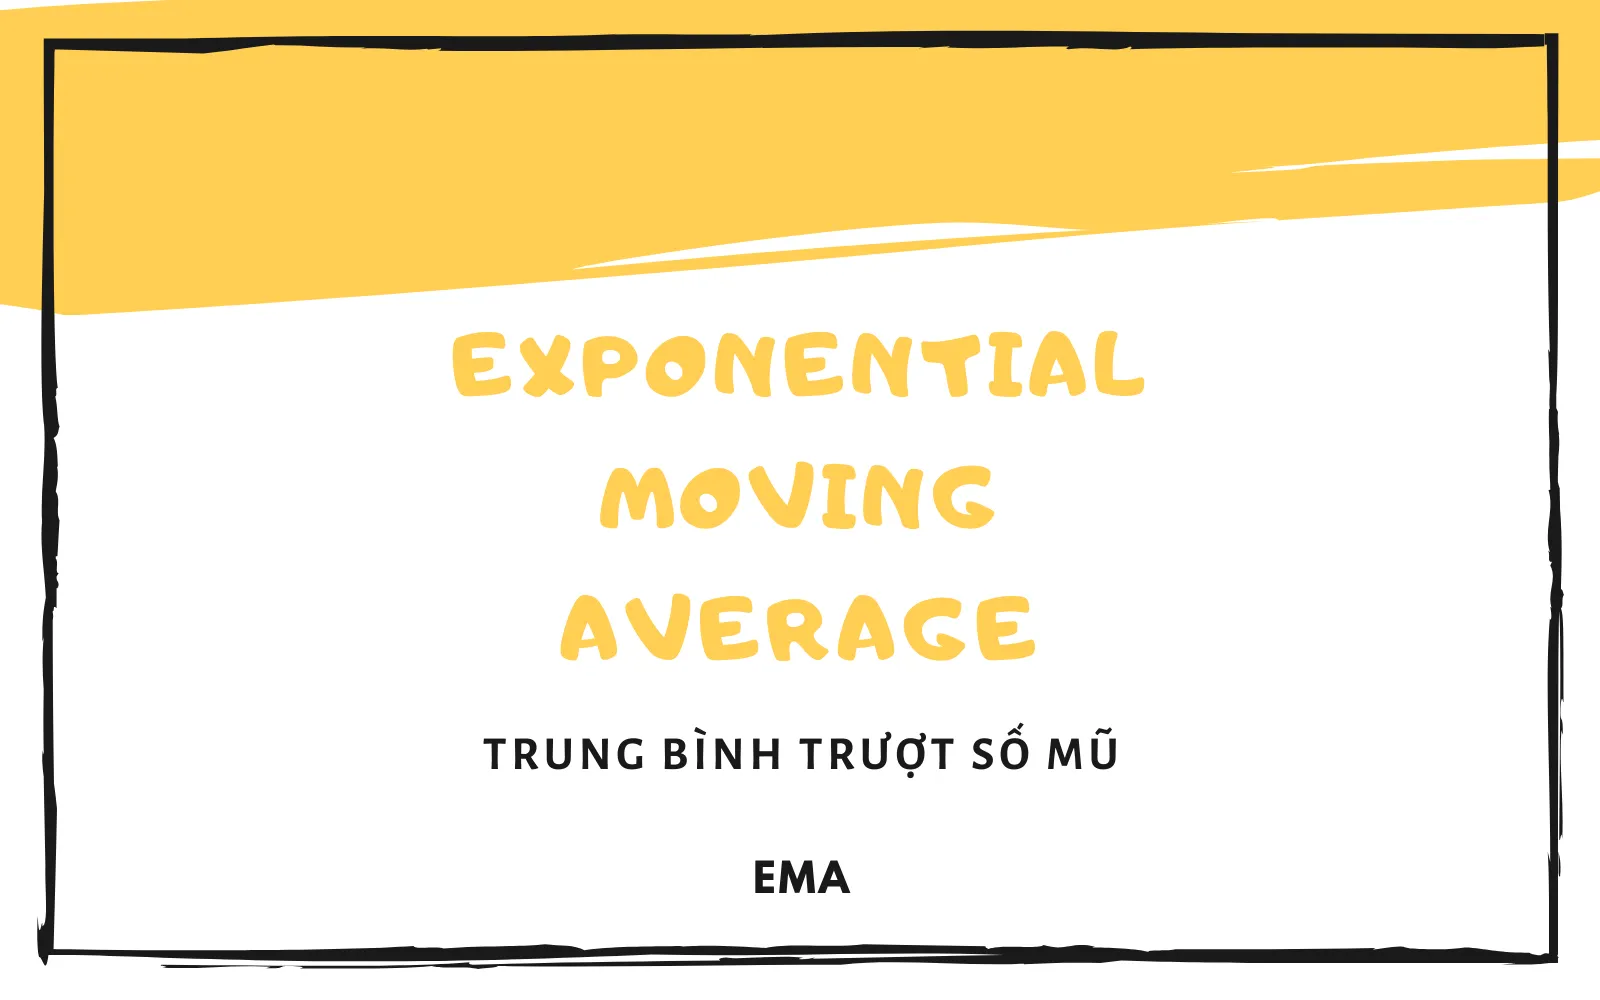 (Exponential moving average)